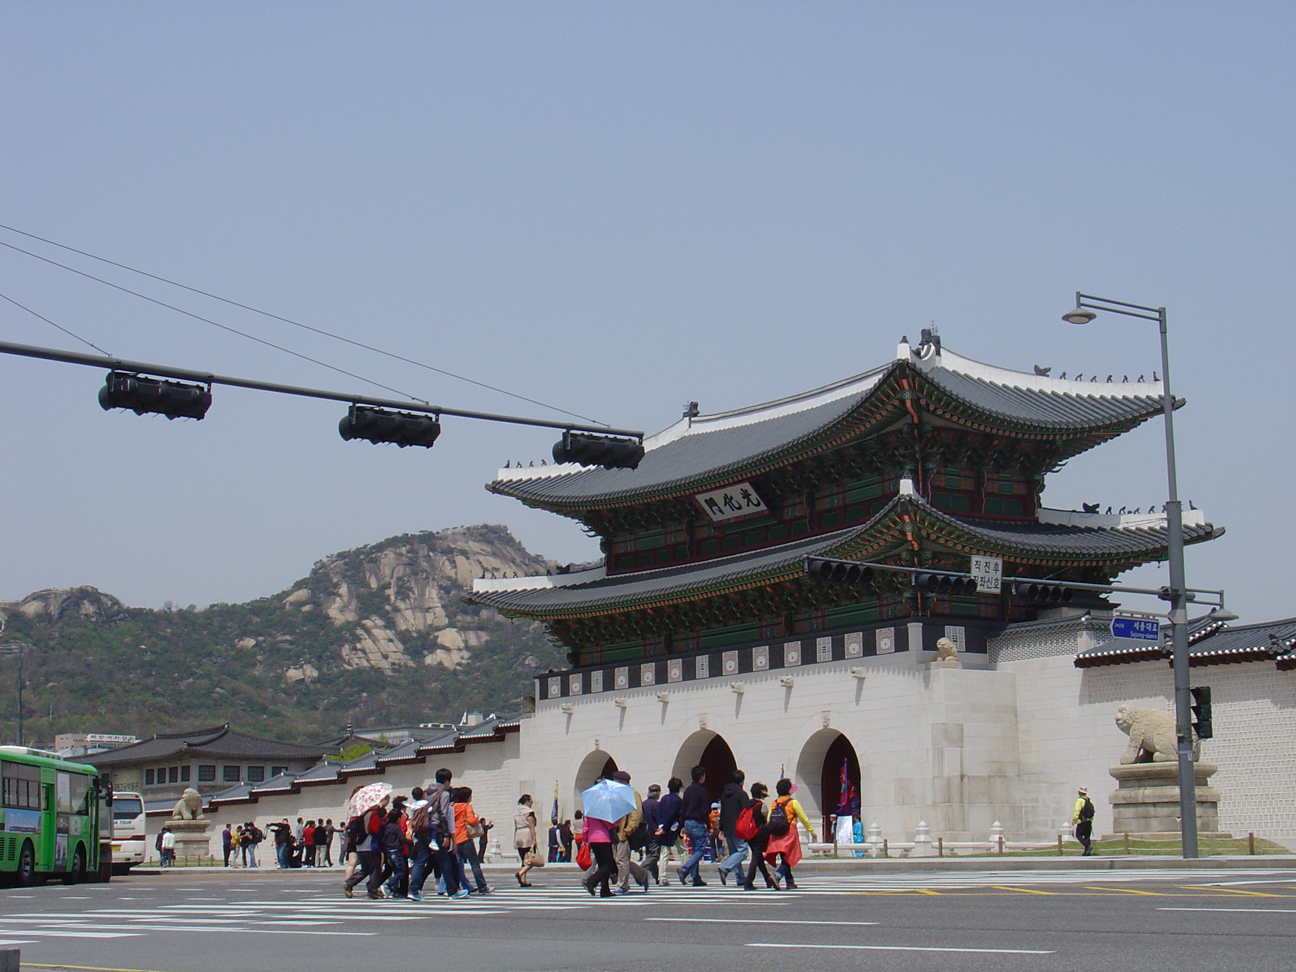 Gwan-Hwa Moon is the front gate of the royal palace.